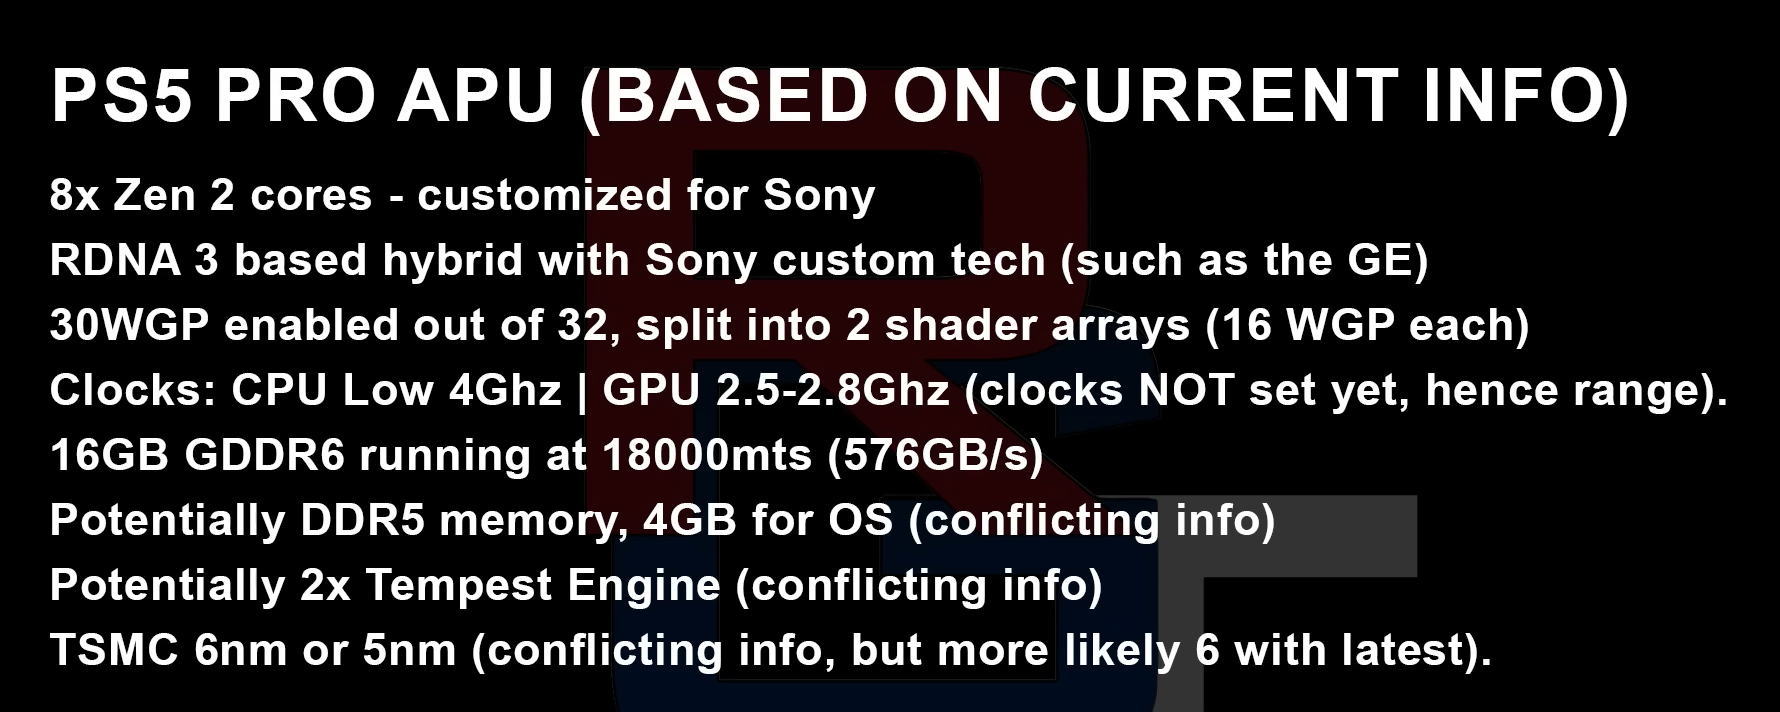 RedGamingTech on X: #Sony #PS5 Pro Is A MONSTER - Performance, Release Date  & Specs ANALYSIS #PS5Pro #Playstation5 #Playstation5Pro #consolegaming    / X